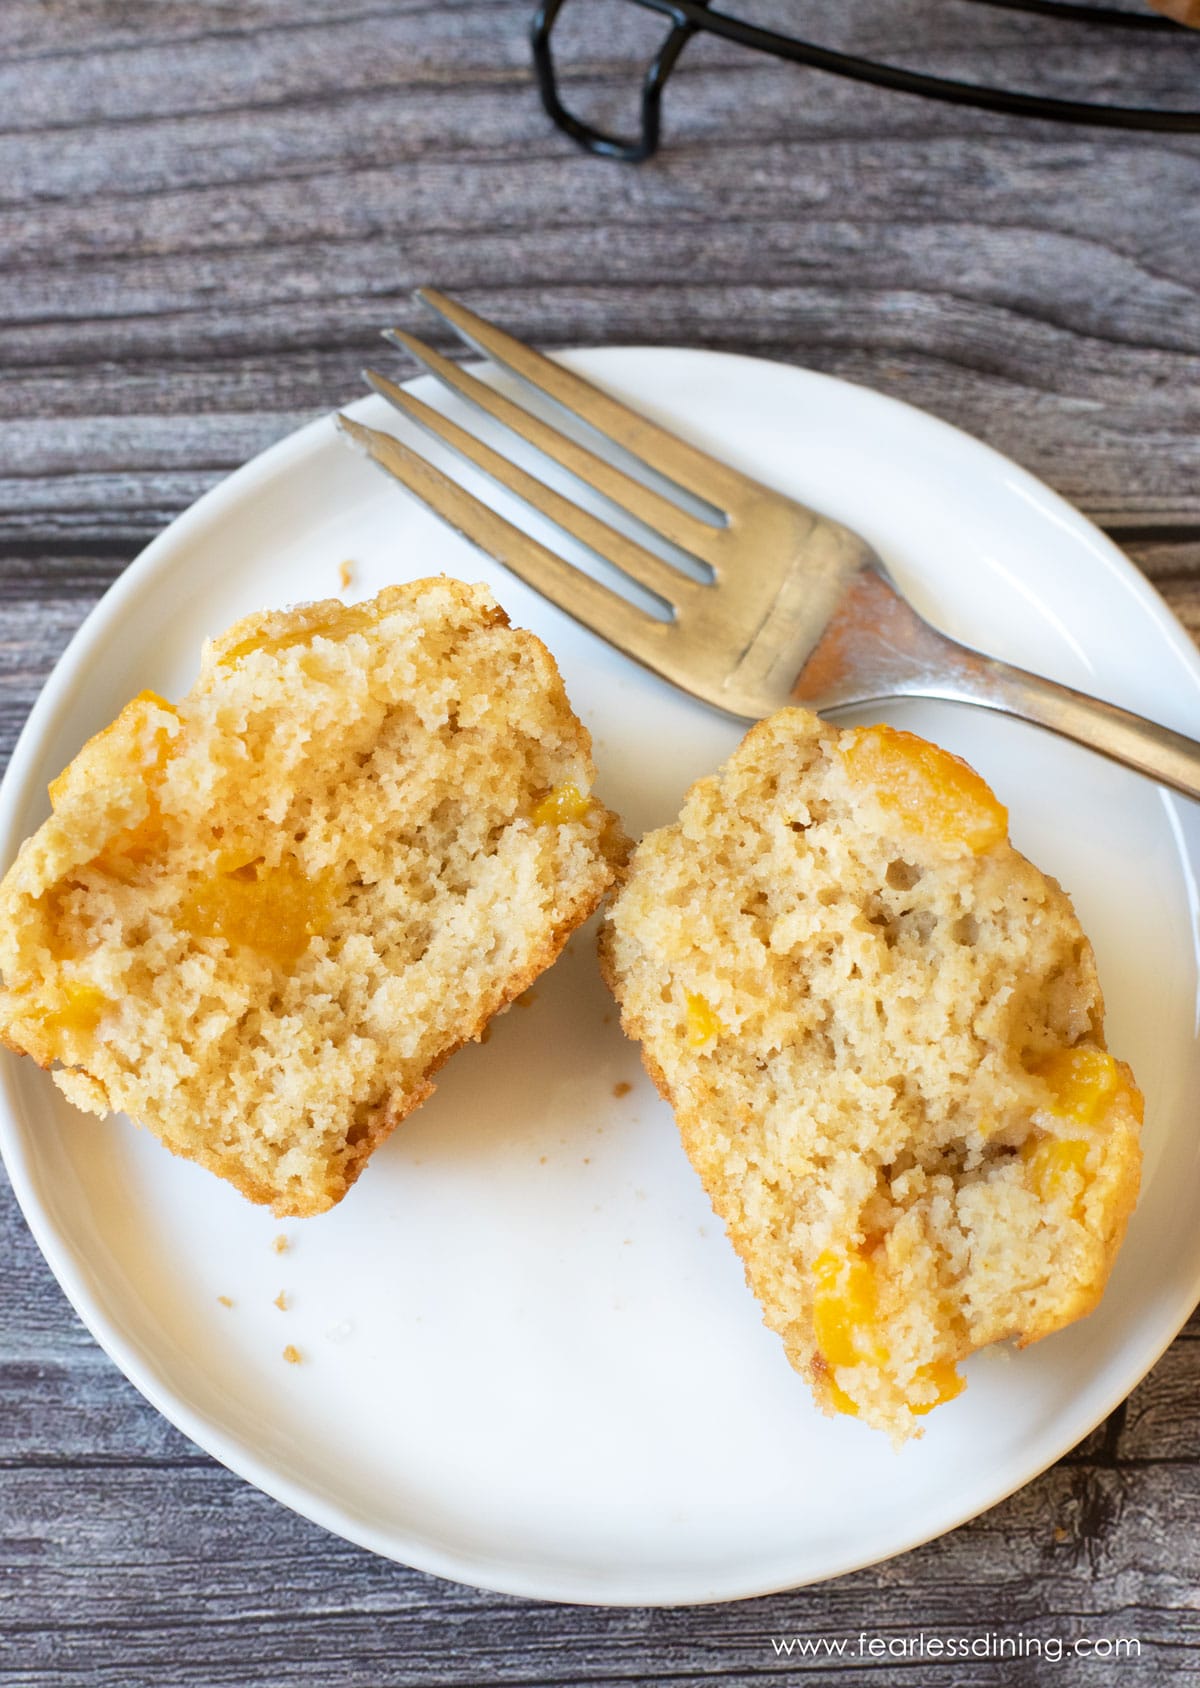 A gluten free peach muffin cut in half on a plate so you can see the peach chunks inside.